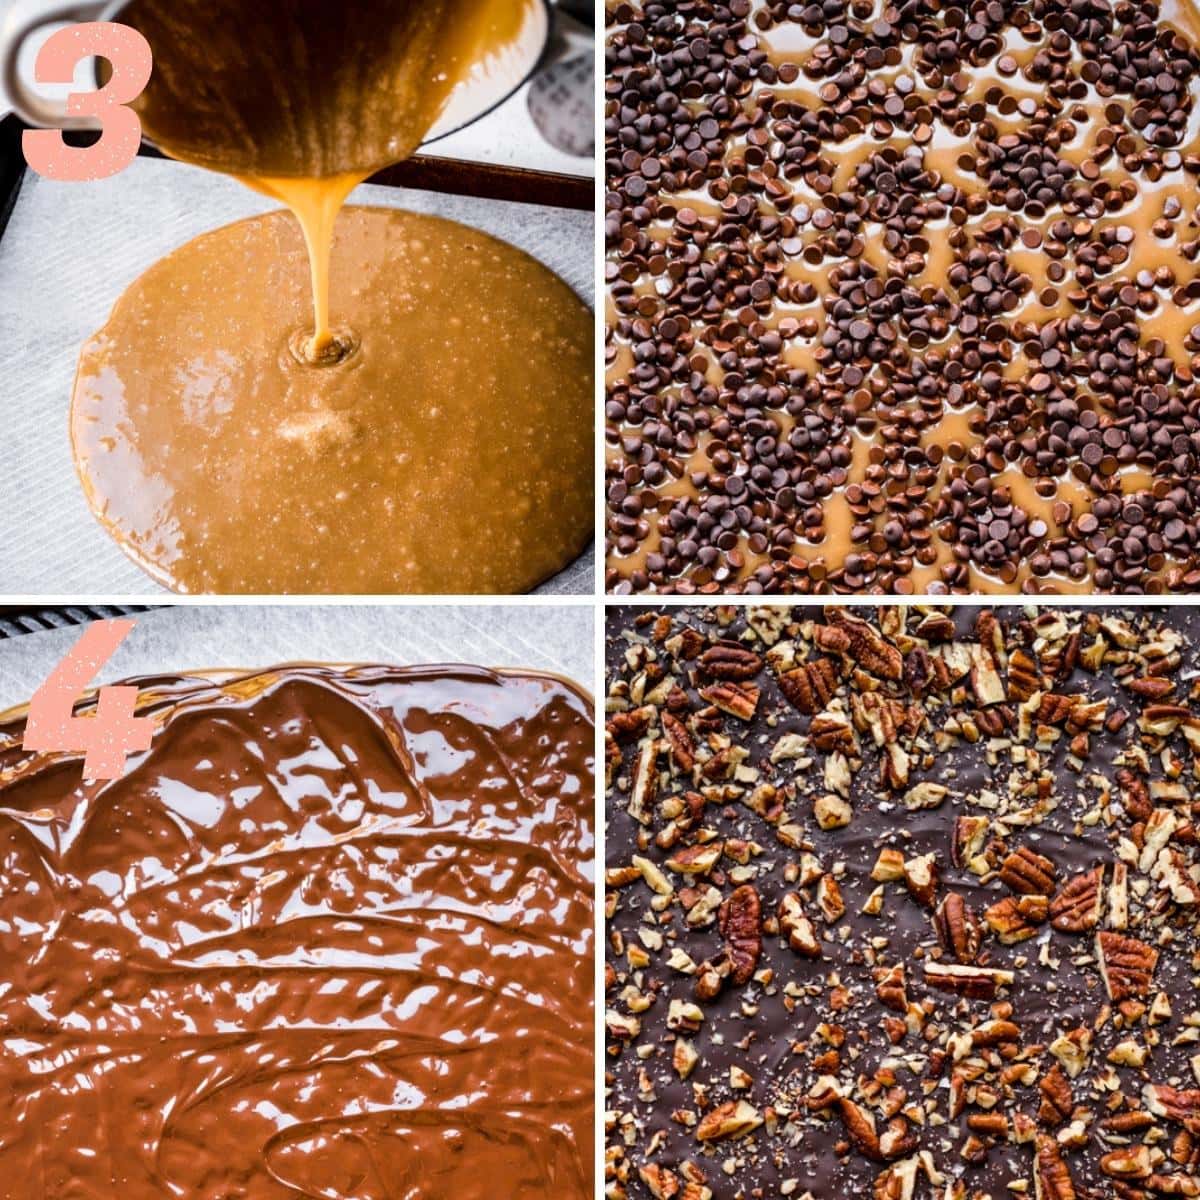 On the top: pouring caramel onto a sheet pan and then sprinkling chocolate chips over it. On the bottom: spreading out chocolate then adding nuts and salt.